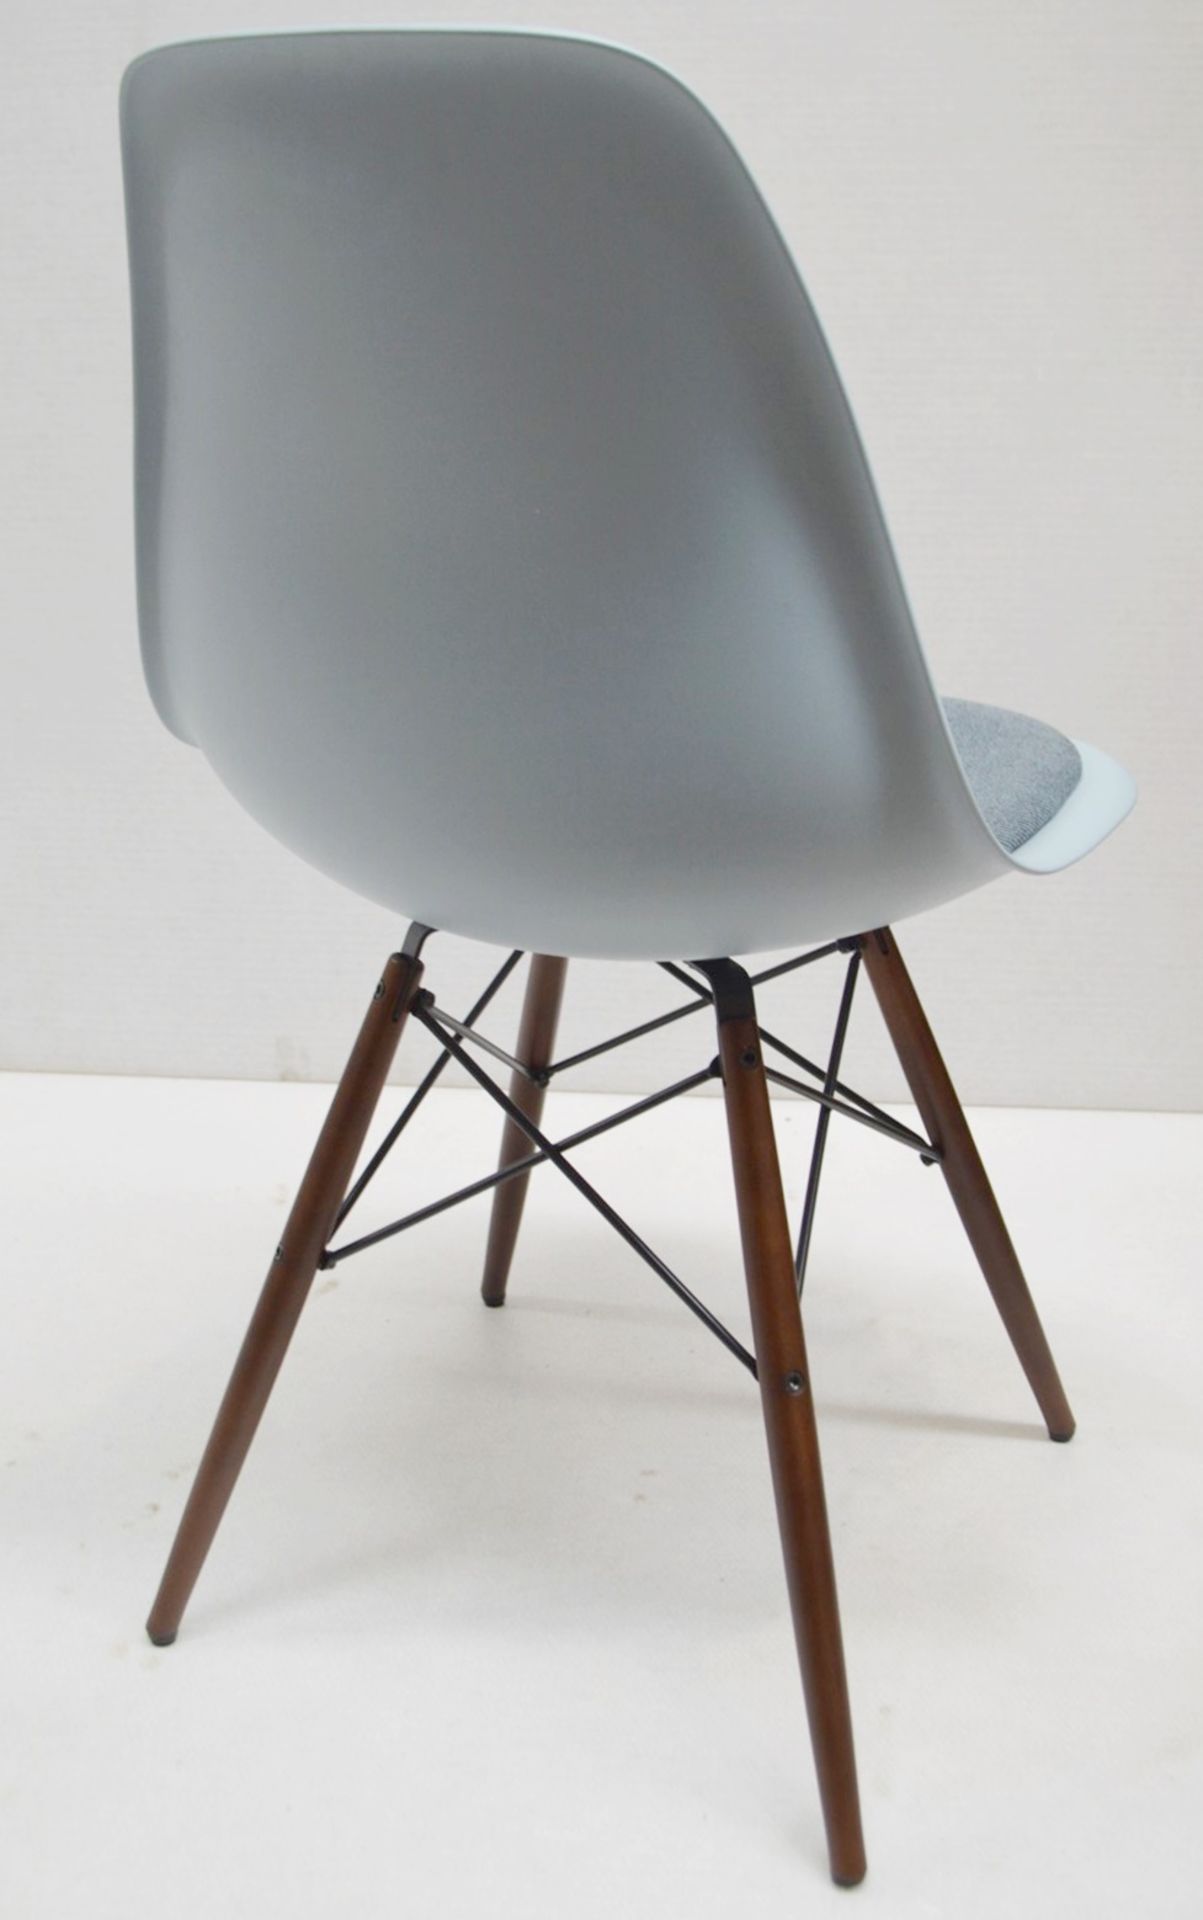 1 x VITRA Eames DSW Designer Chair With Upholsted Seat And Maple Base In A Dark Stain - Image 3 of 9